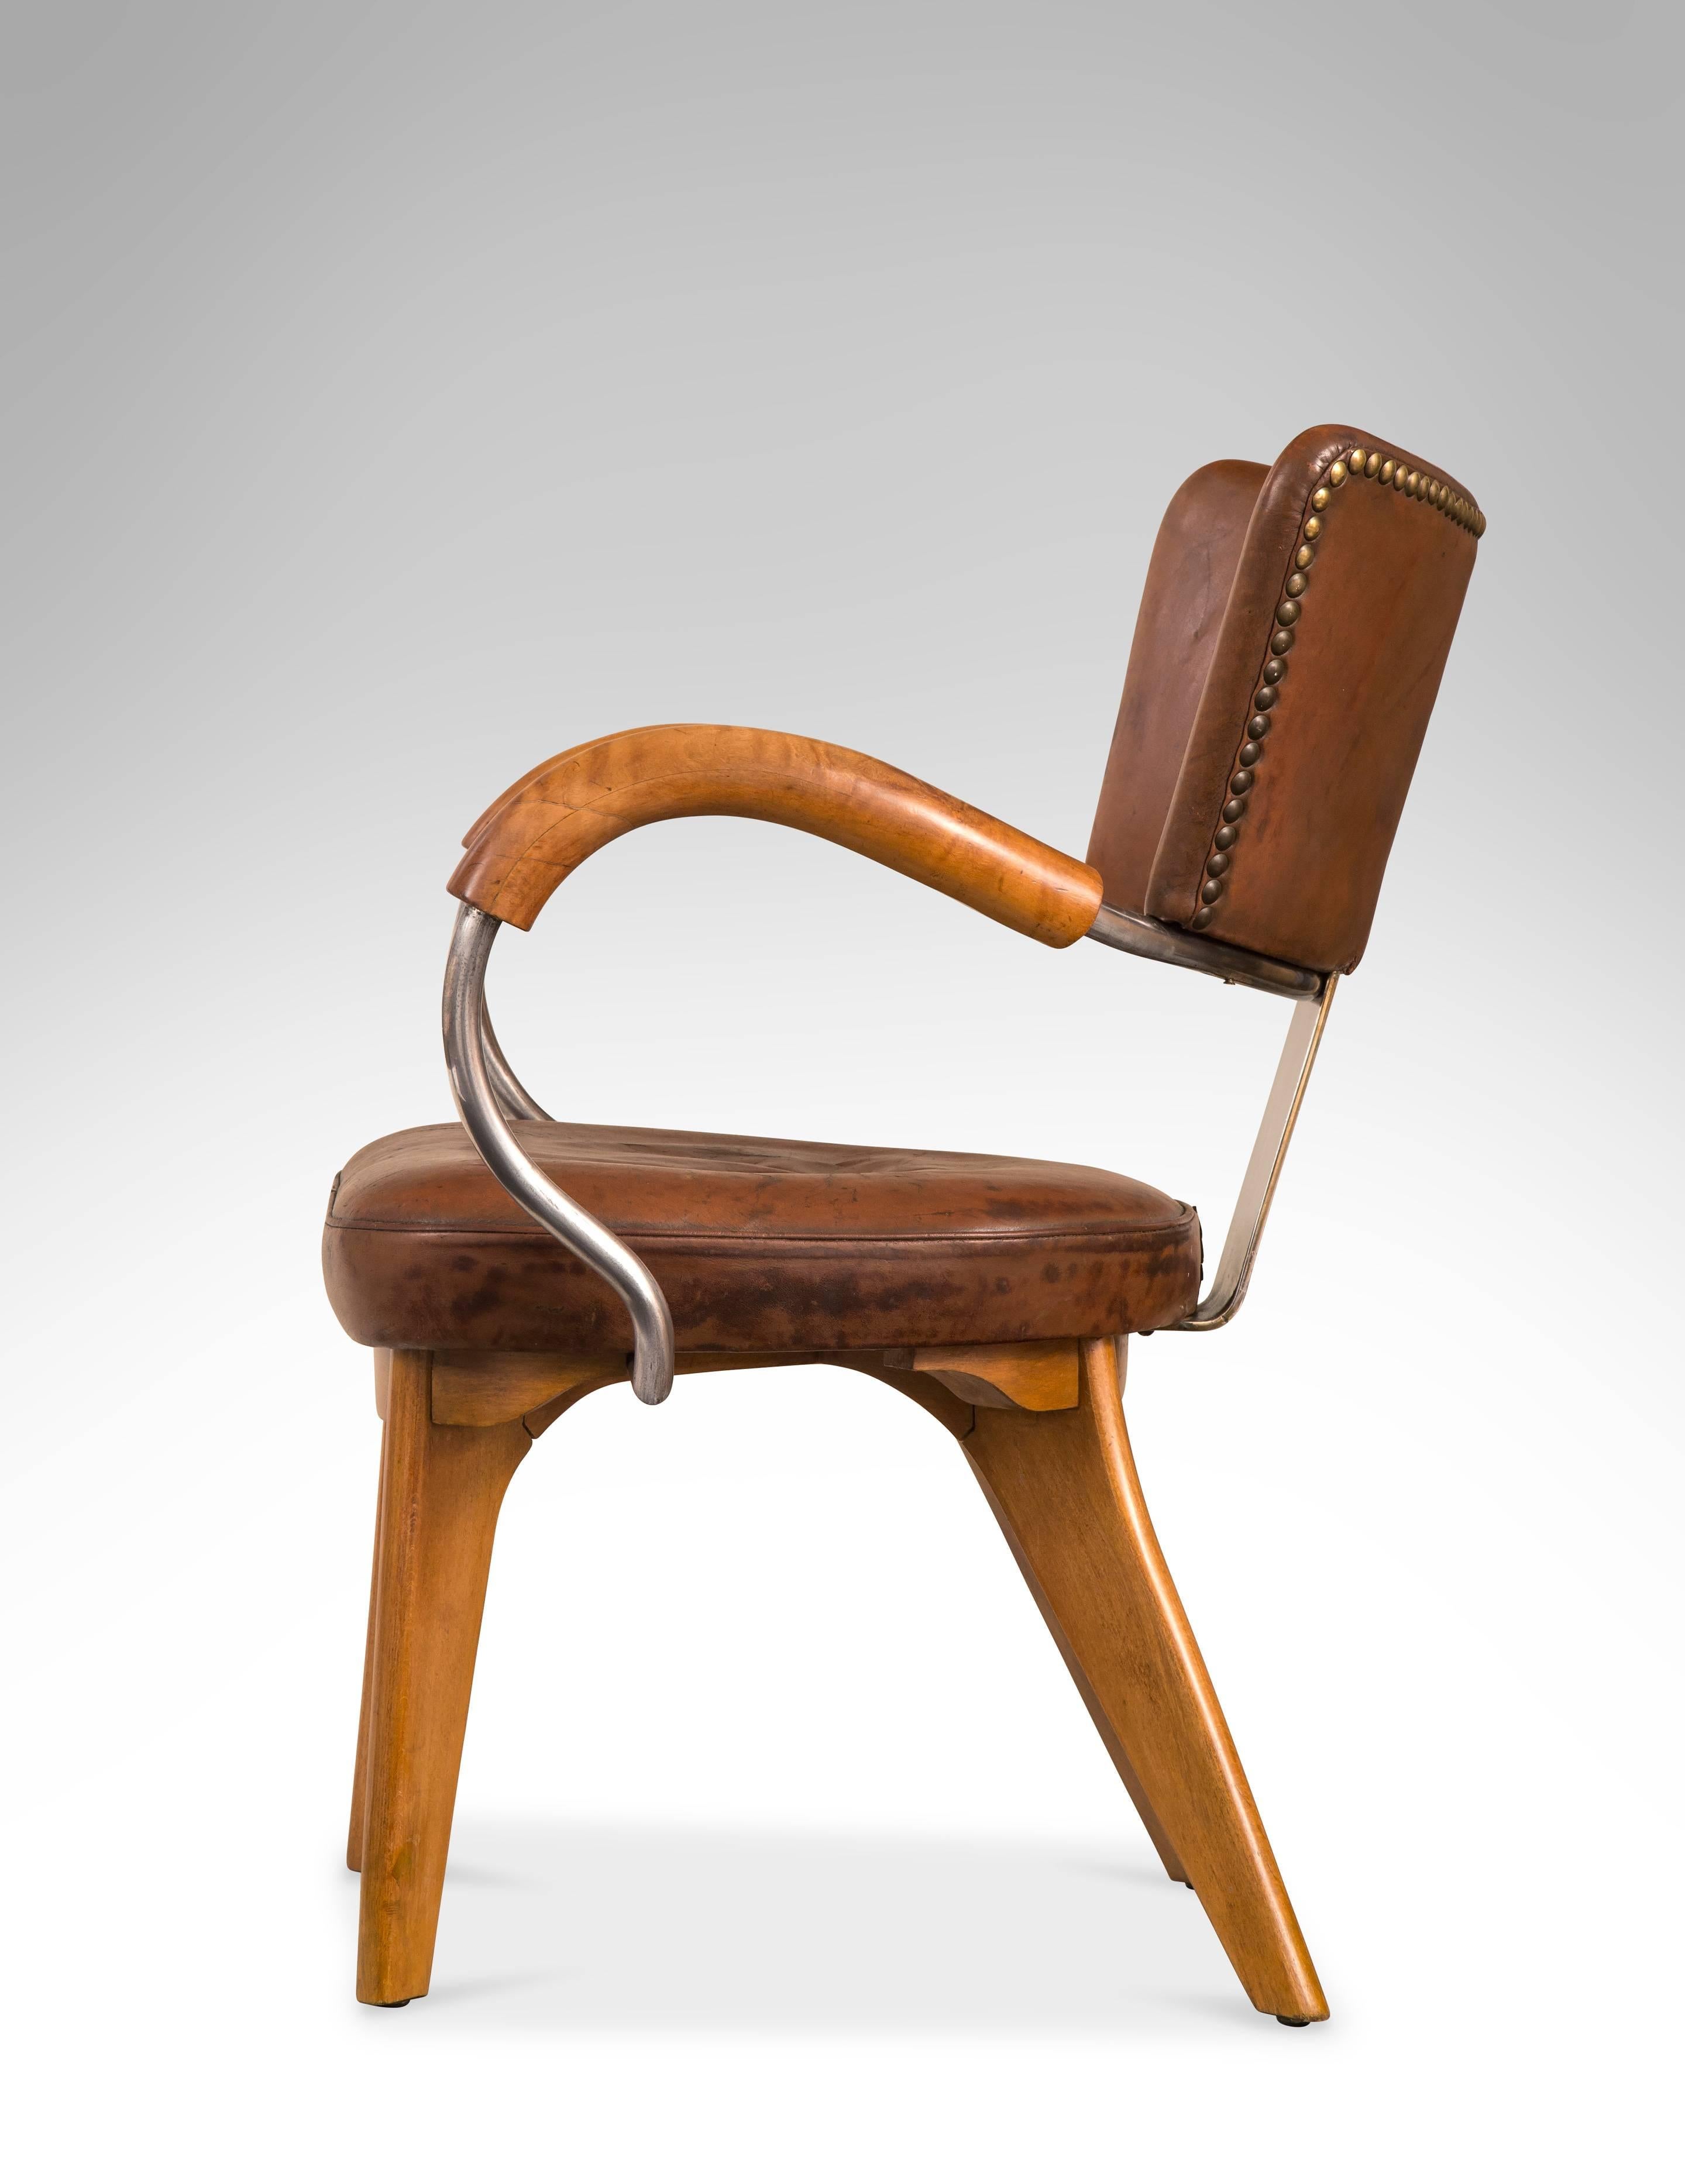 This bold early modern chair was undoubtedly a prototype, still retaining its original leather. The chair is incredibly comfortable. The concave backrest, issuing two gracefully curved arms, above a padded leather cushion, on shaped legs. 

Sketches